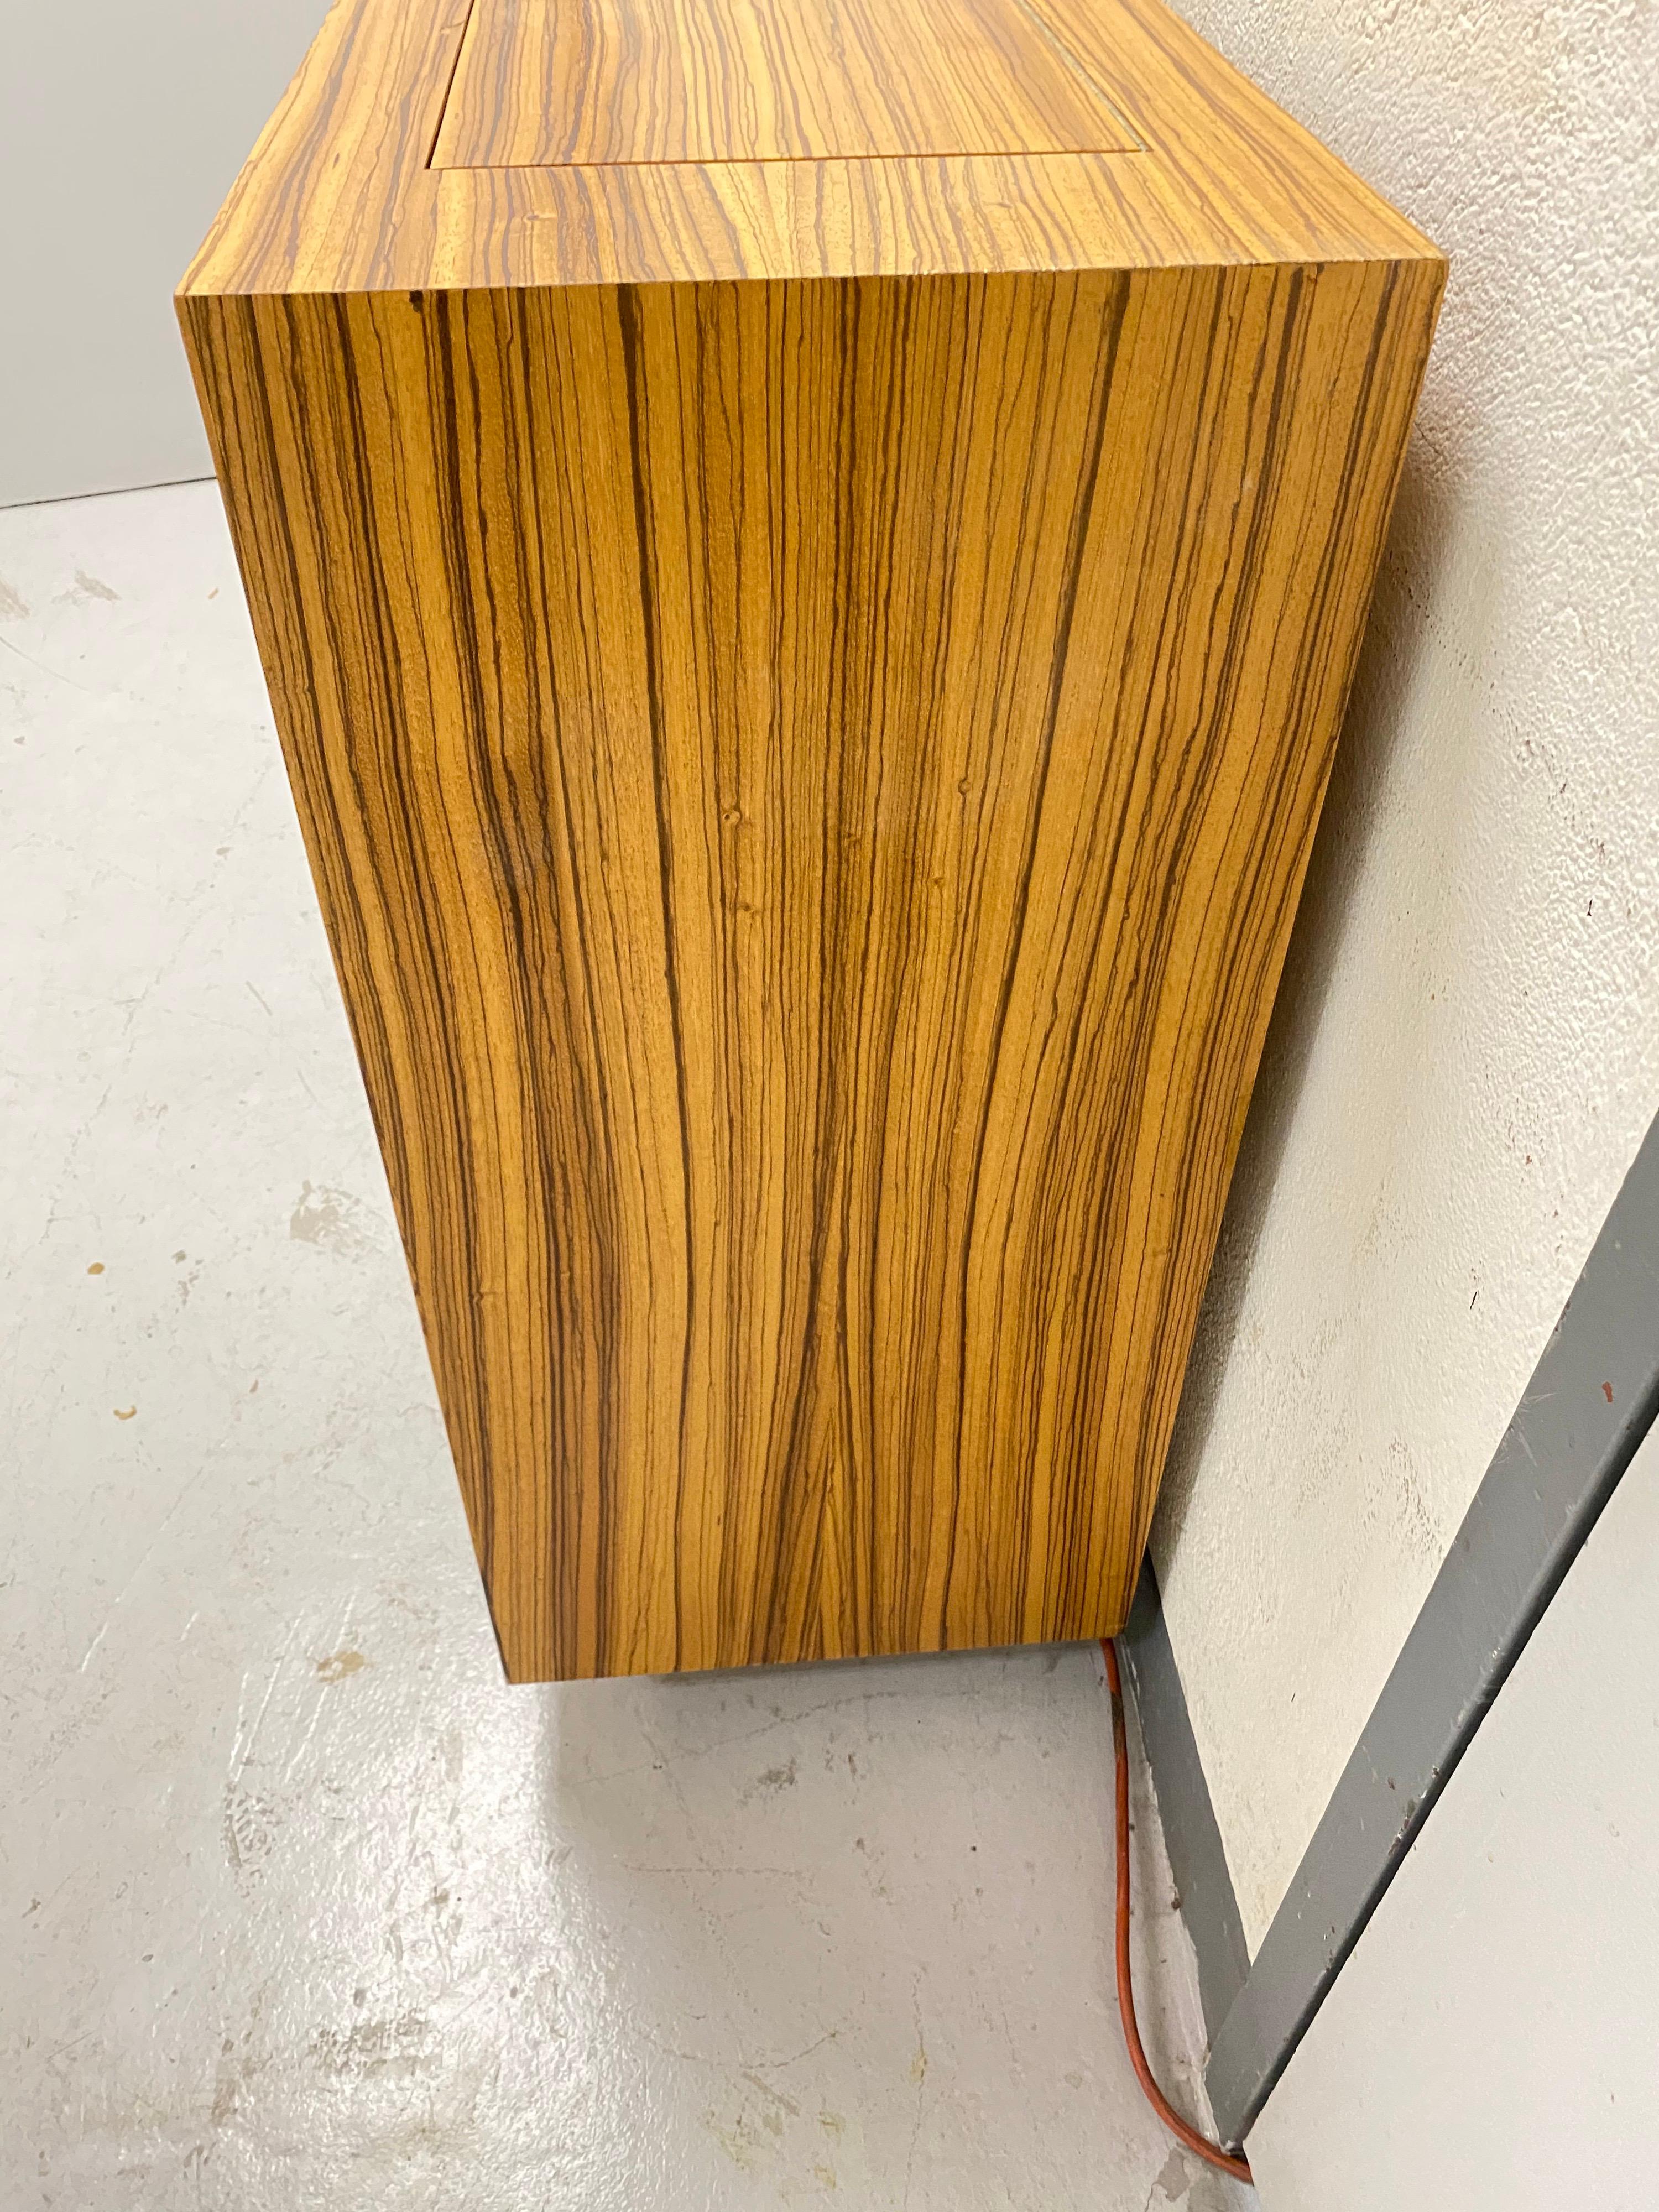 Modern tiger maple and zebrawood veneer cabinet. Lift TV mechanism with remote
With nexus 21 lift TV mechanism to raise and lower flat screen TVs.
Measures: Opening 44.75 wide x 10.5 deep.
Paper on doors can be changed.

Additional videos available